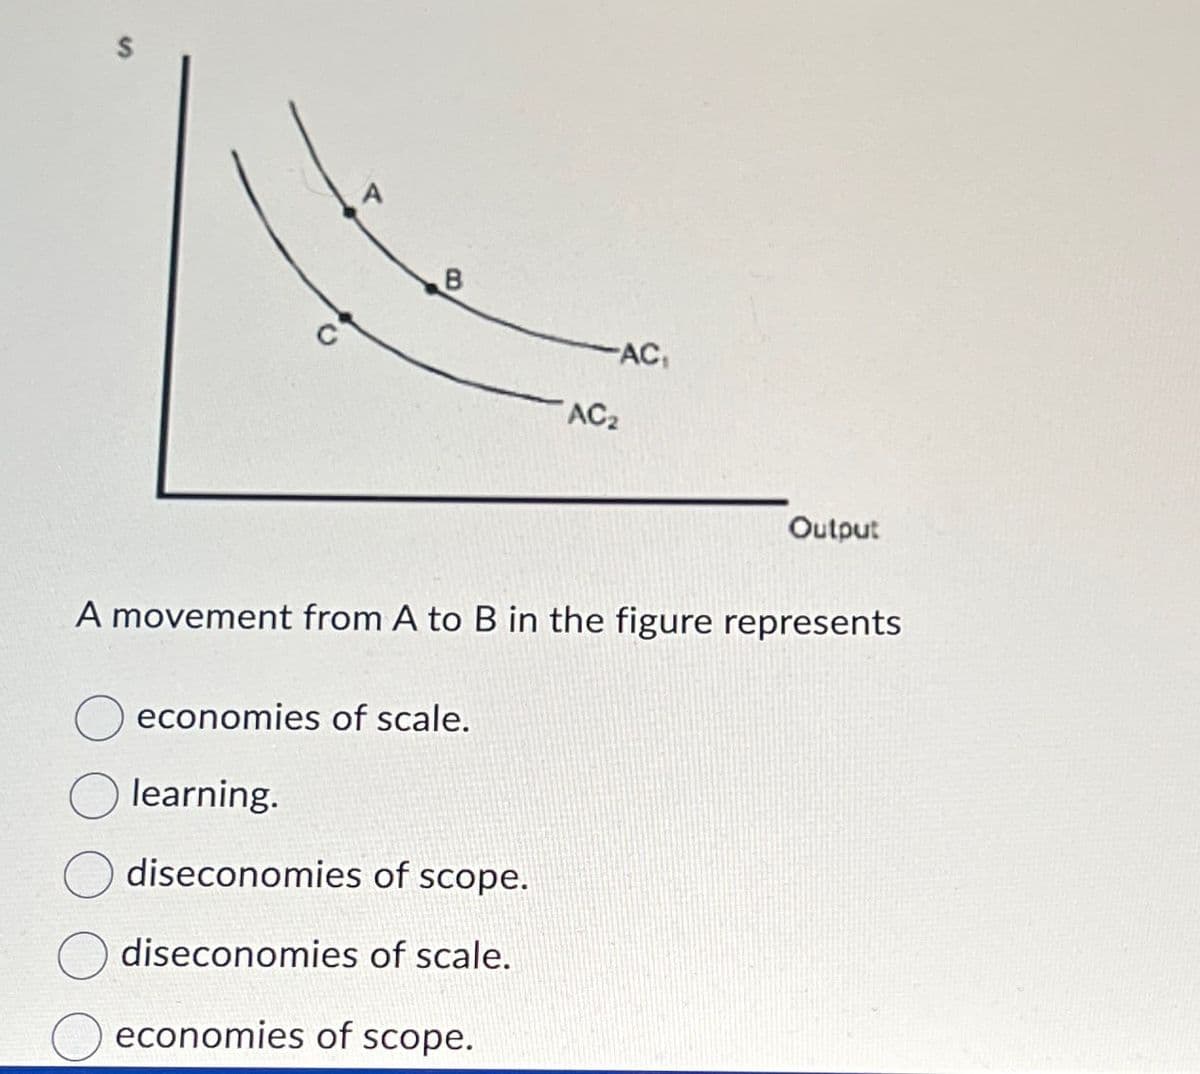 B
AC₁
AC2
Output
A movement from A to B in the figure represents
economies of scale.
learning.
diseconomies of scope.
diseconomies of scale.
economies of scope.